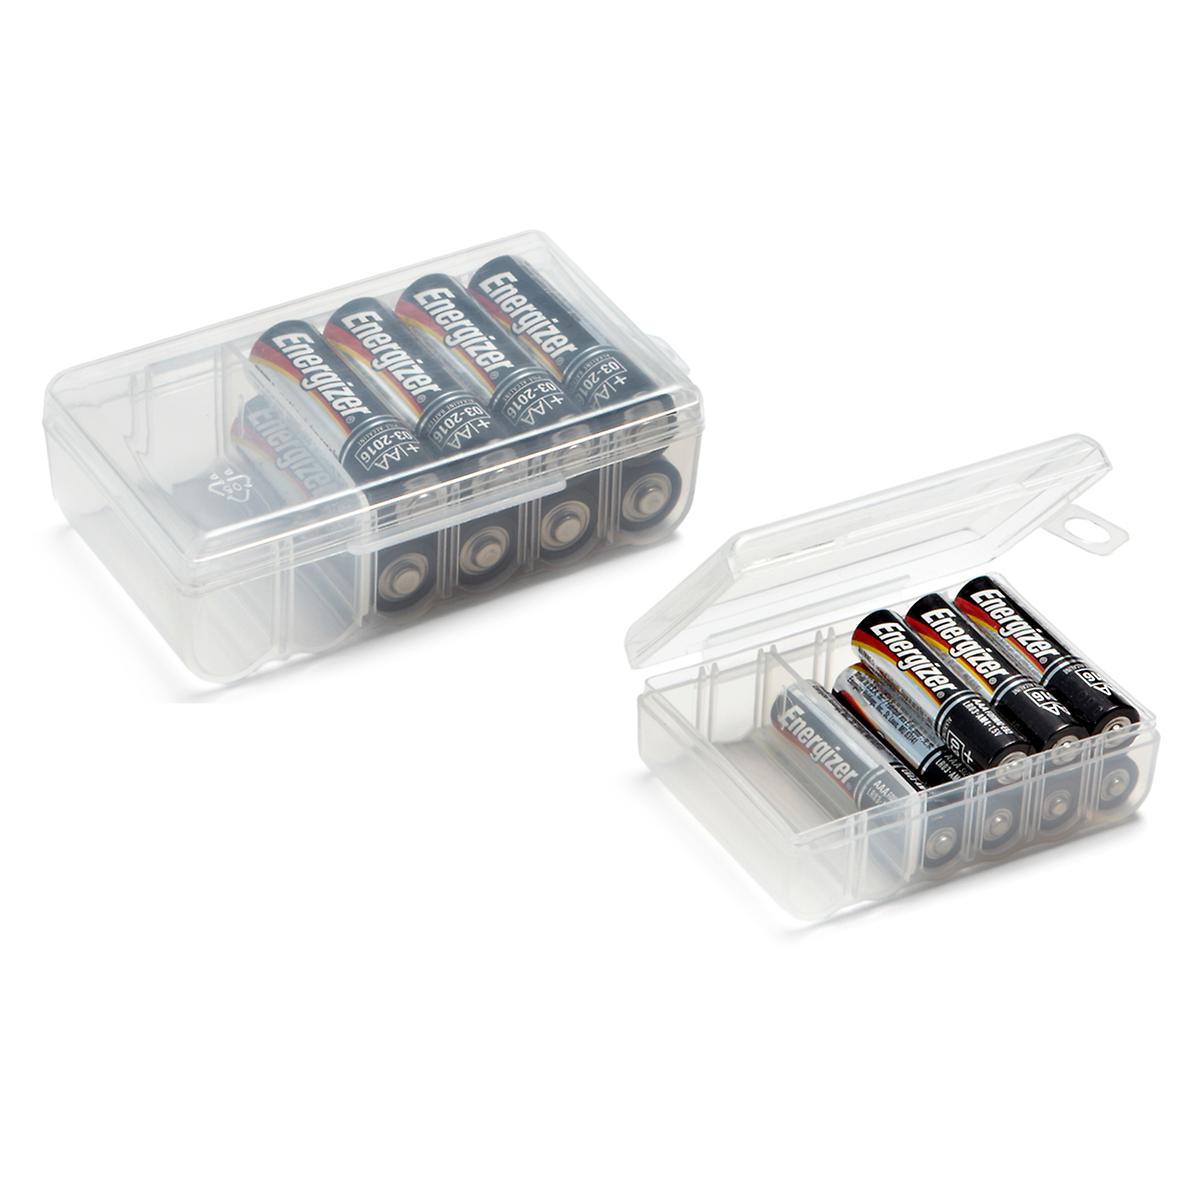 Battery Storage Containers | The Container Store